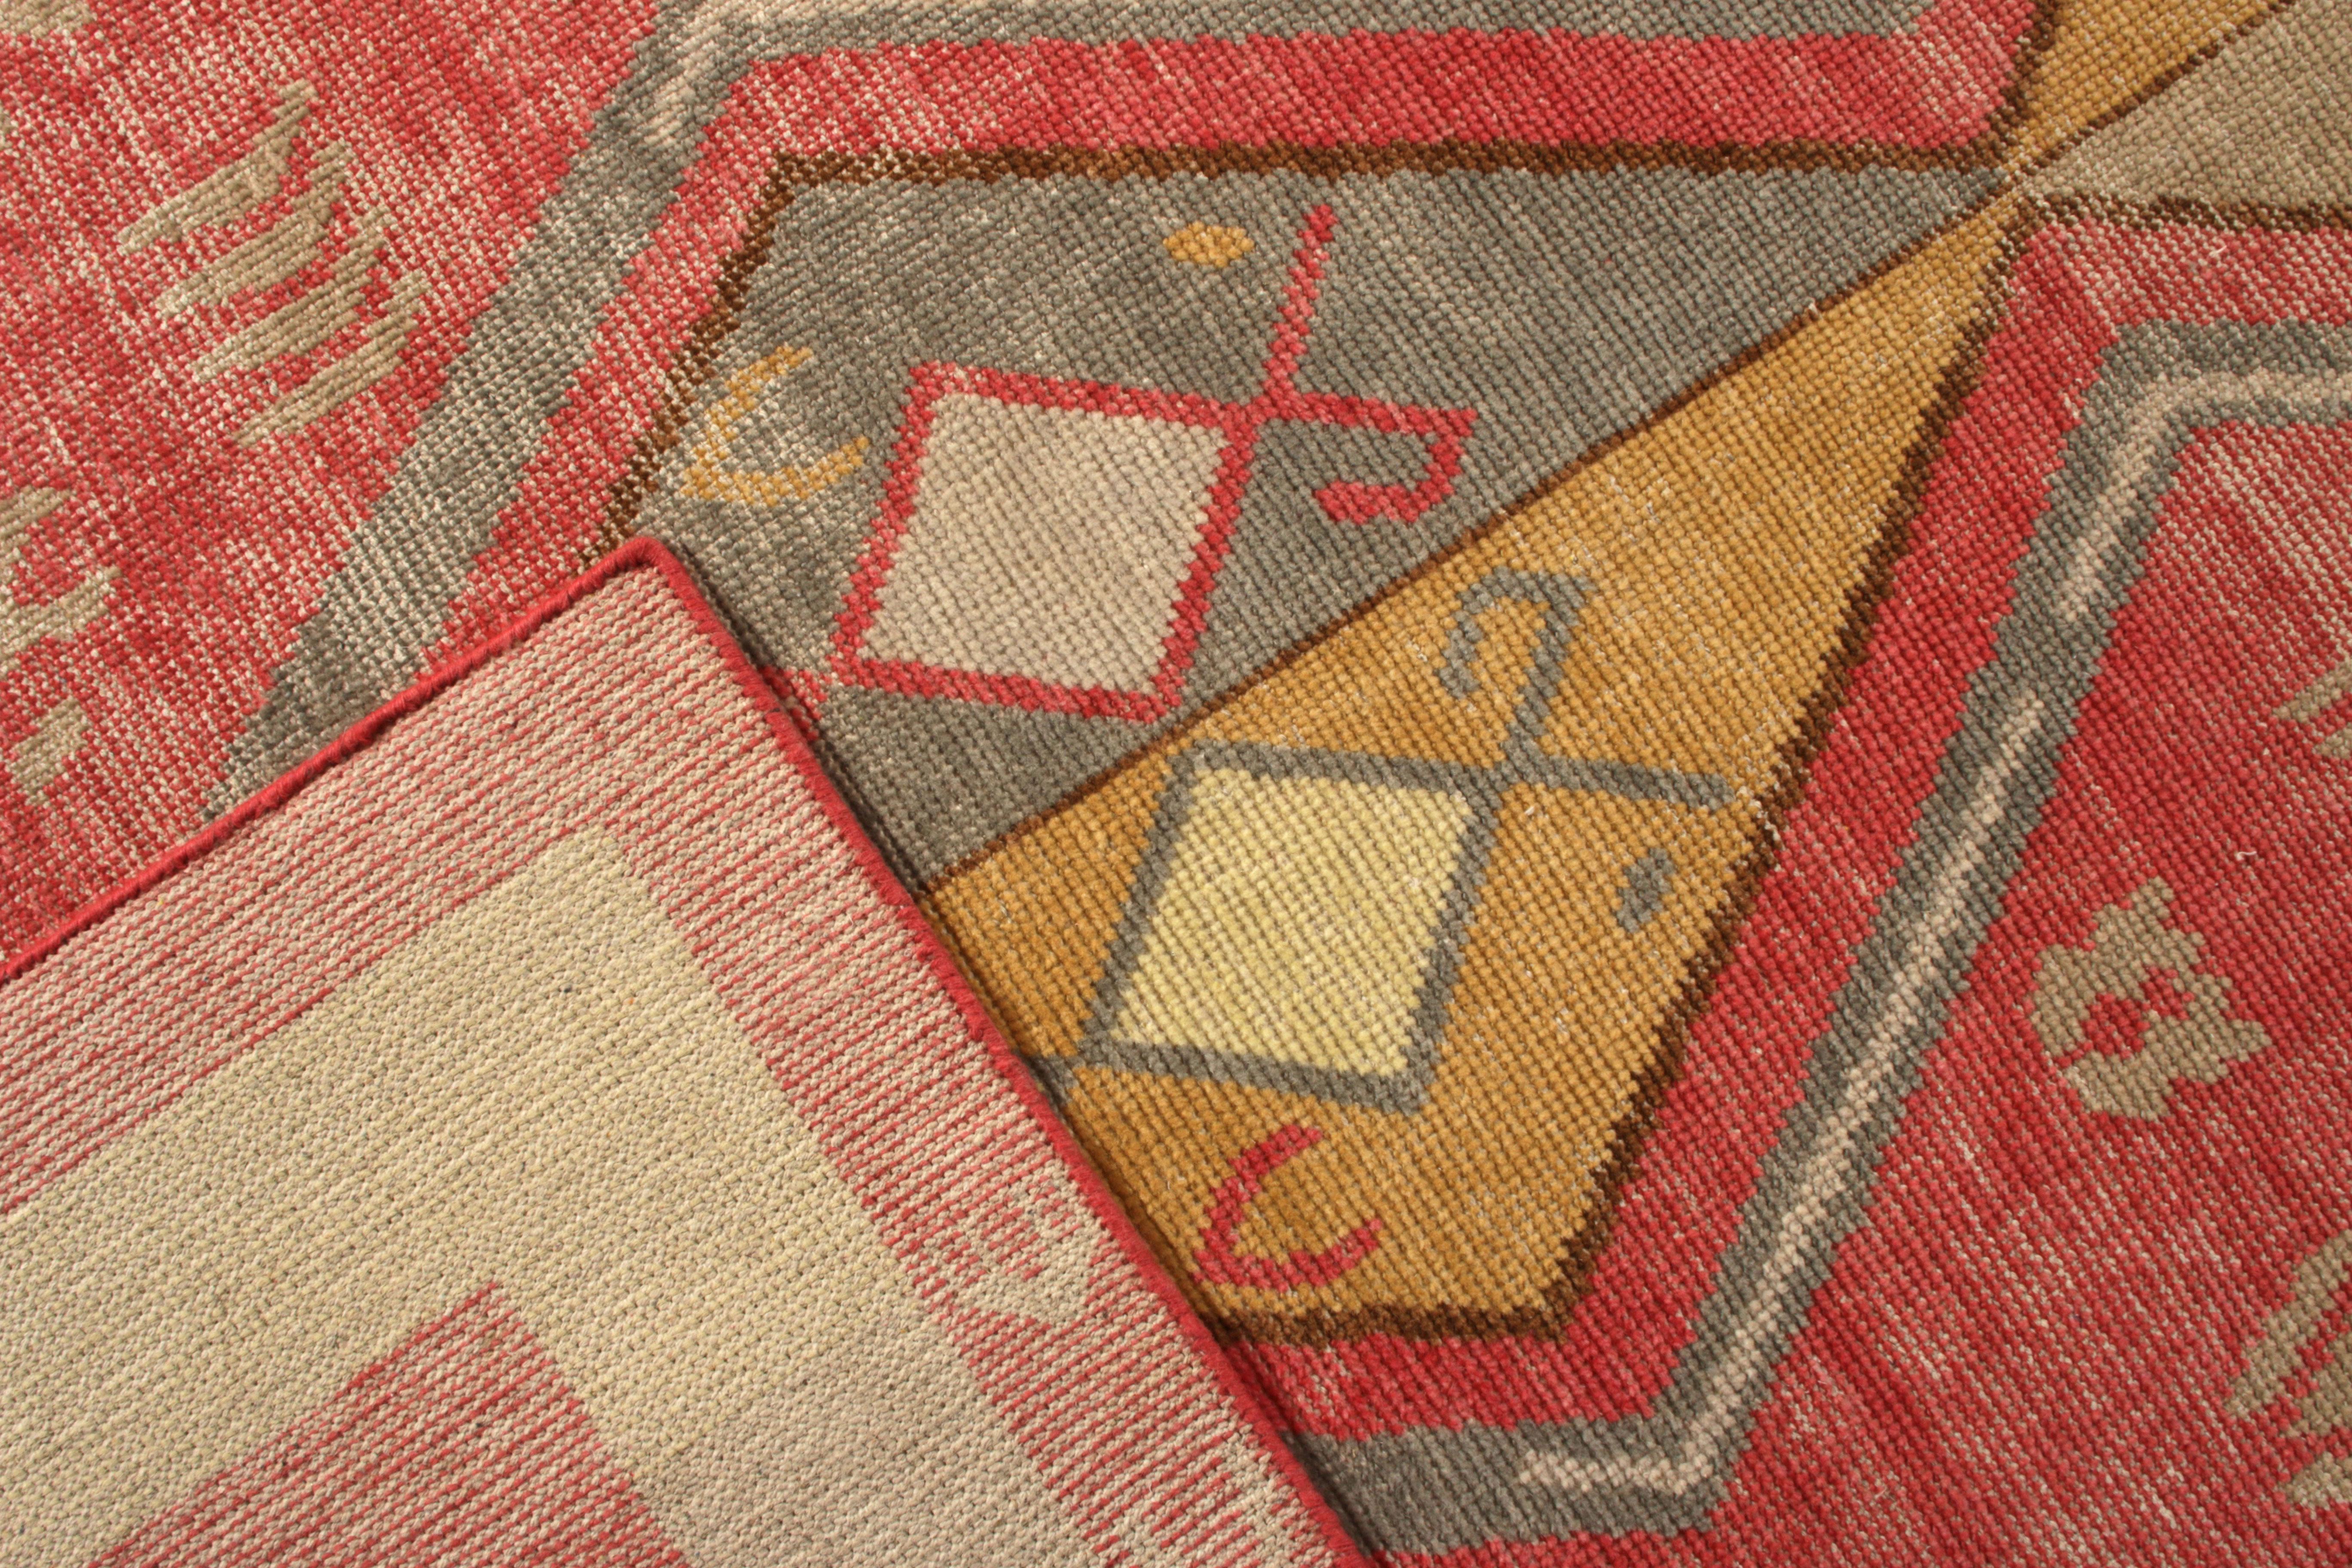 Wool Rug & Kilim's Hand-Knotted Tribal-Style Rug, Red and Gold Diamond Pattern For Sale